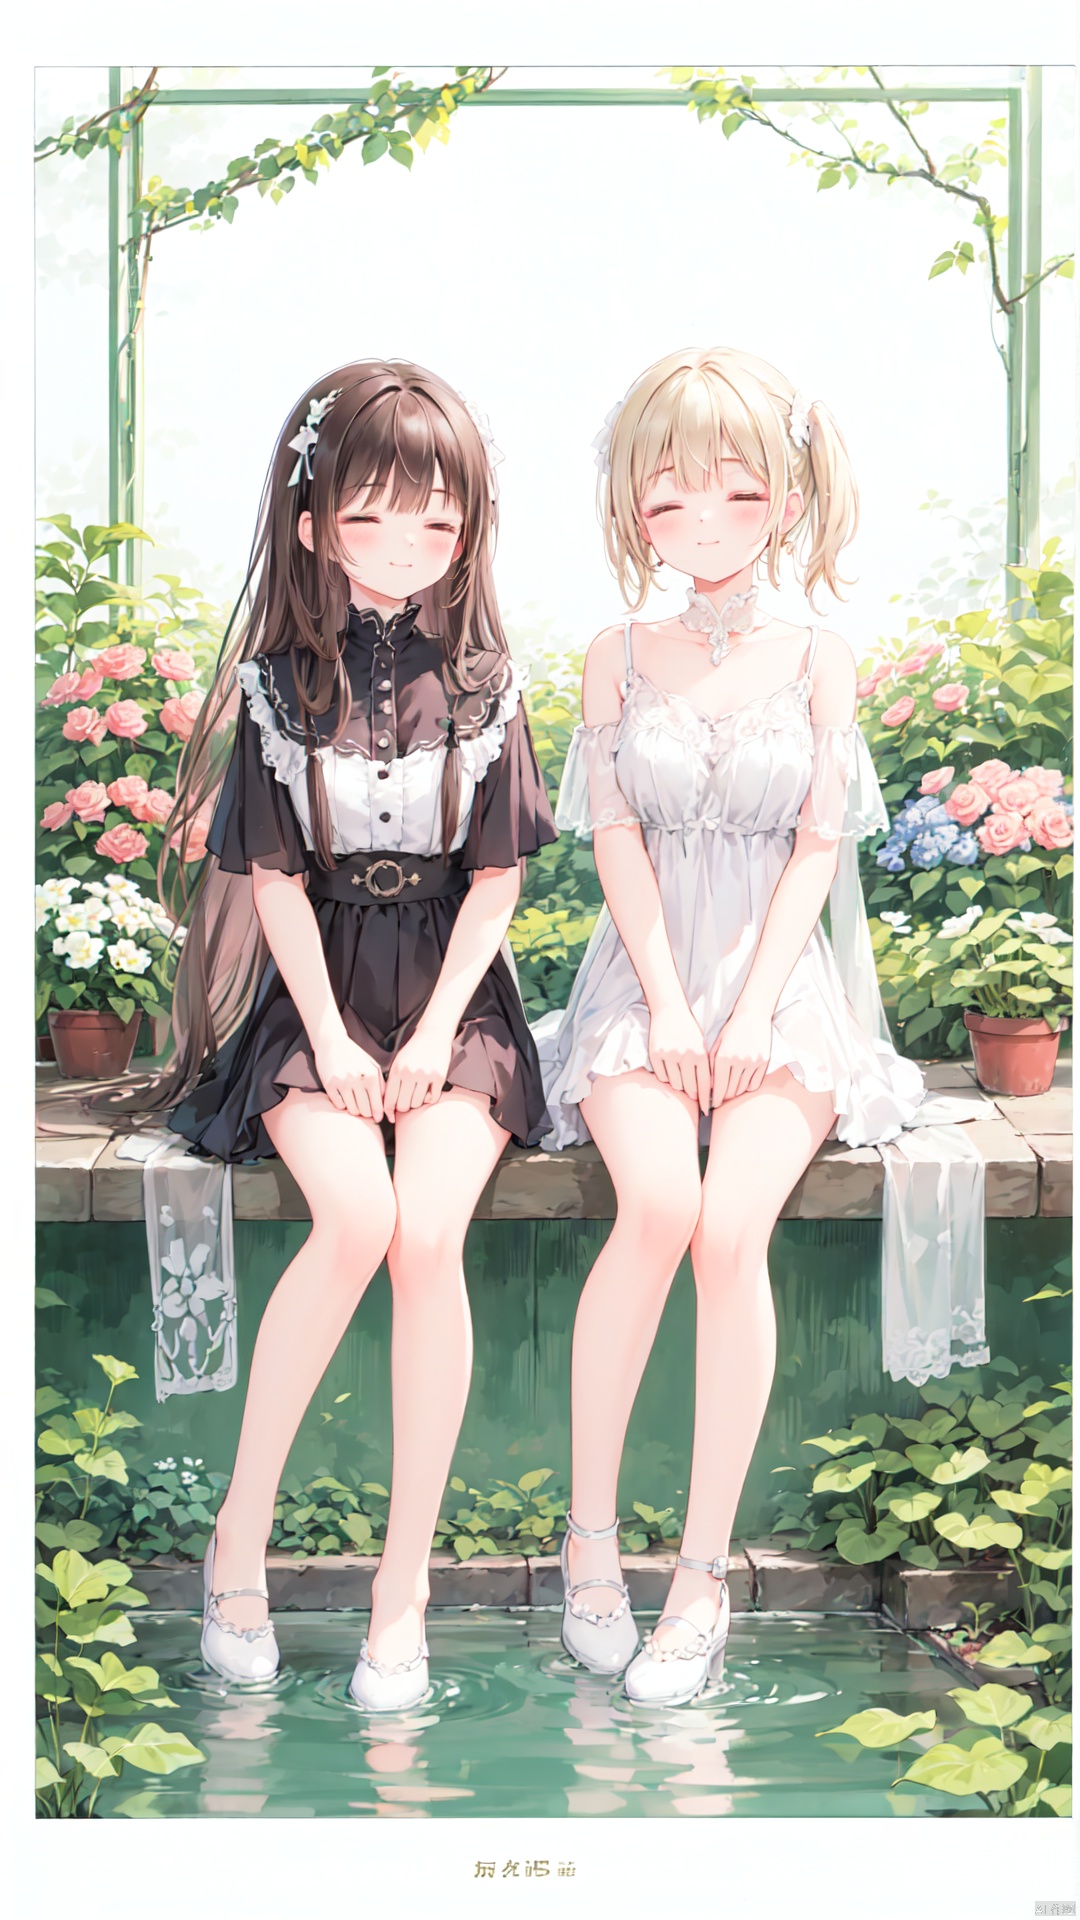 lovely smile,(background with border:1.2),[((floral ornaments,flower stand,Water)Background:1.2)::10], longan,closed eyes,long hair,(2girls:1.2),(multiple girls:1.2),blush,bangs,white background,pale color,knees up,closed mouth,no nose,facing viewer,legs together,(Garden:1.1),Close,